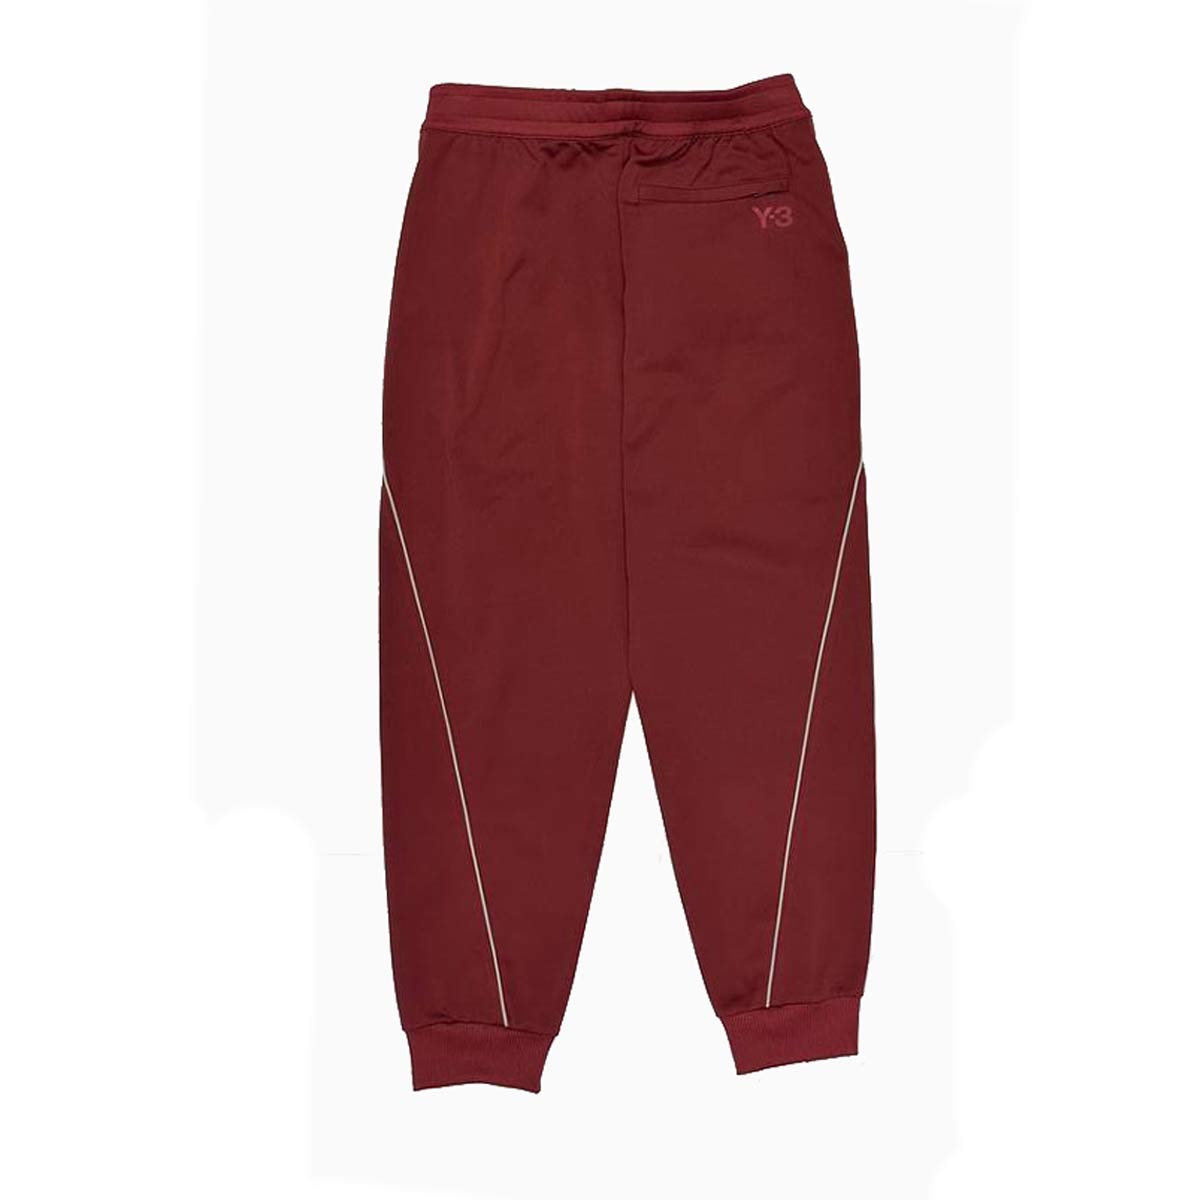 Y3 Superstar Shared  Pant